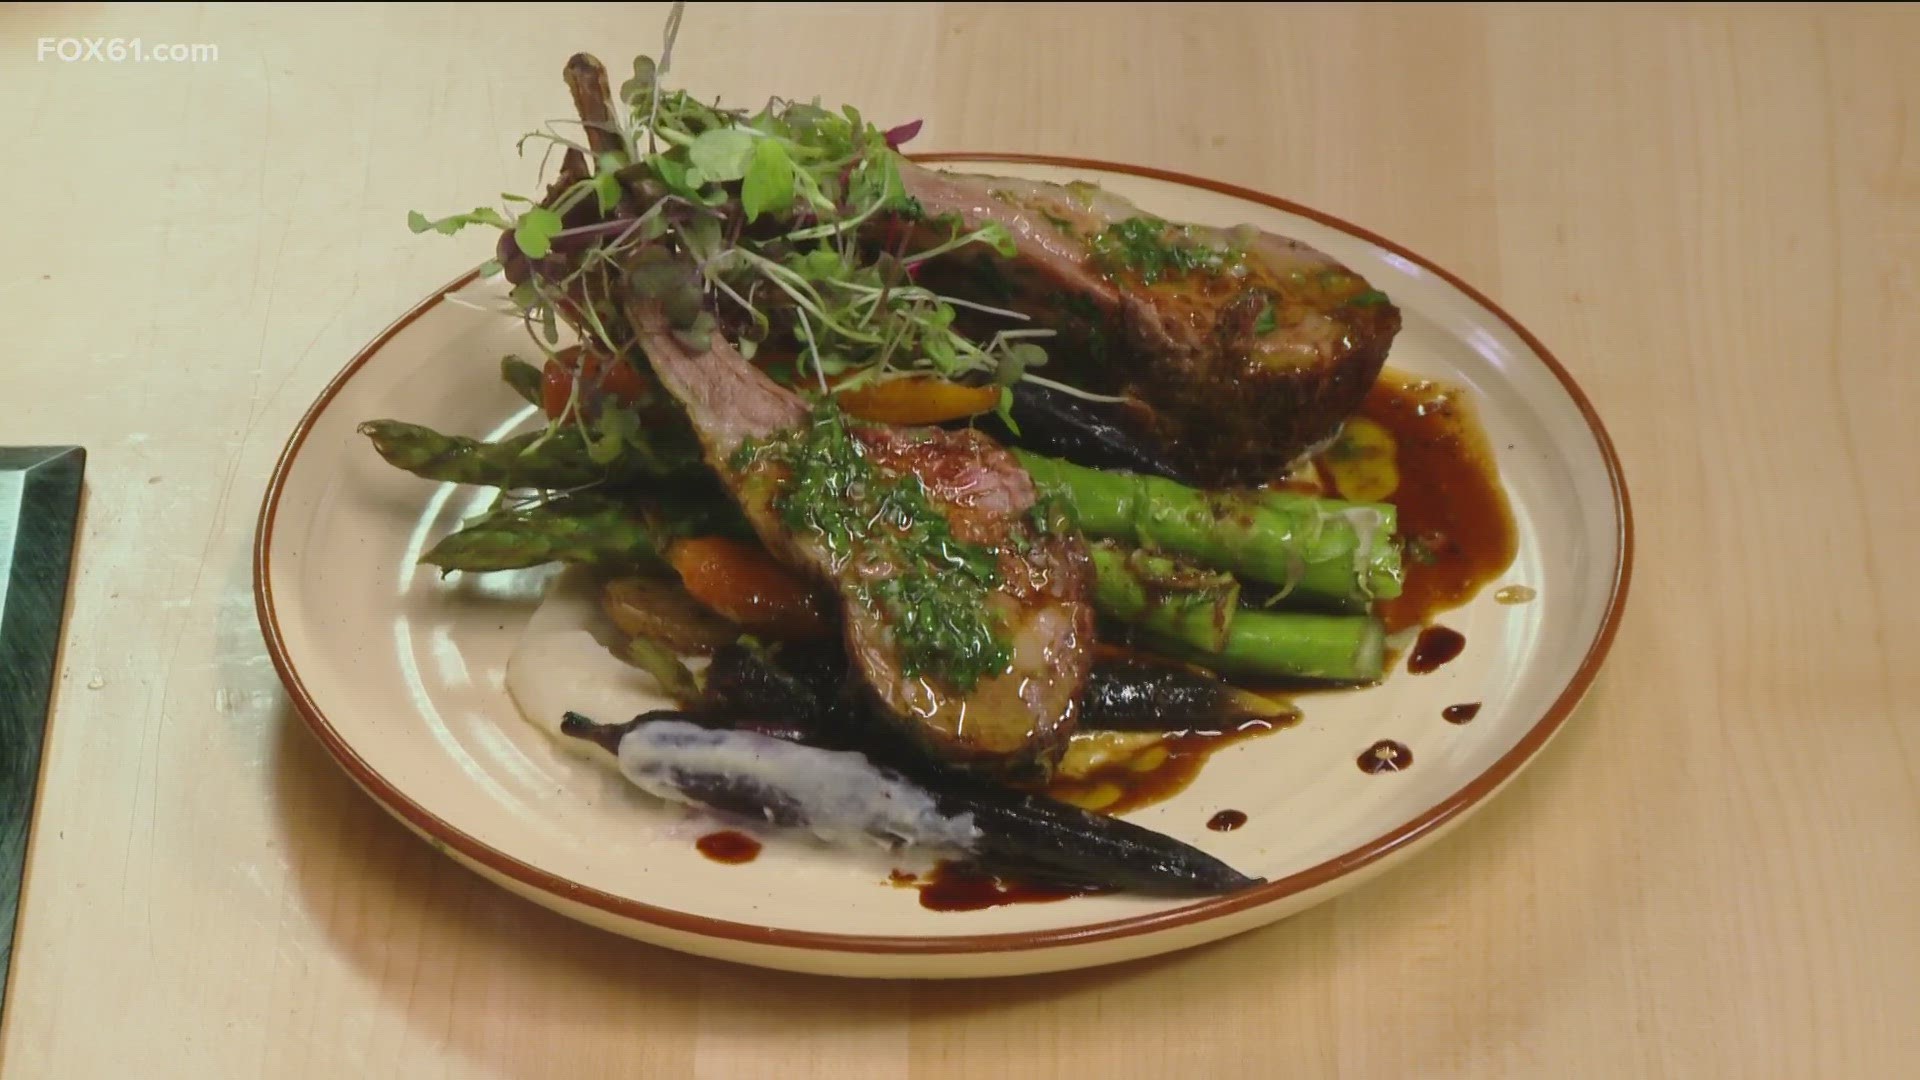 Chef Tommy Crawford from Viron Rondo Osteria shares how to make Lamb, Cauliflower Puree, and Salsa Verde.